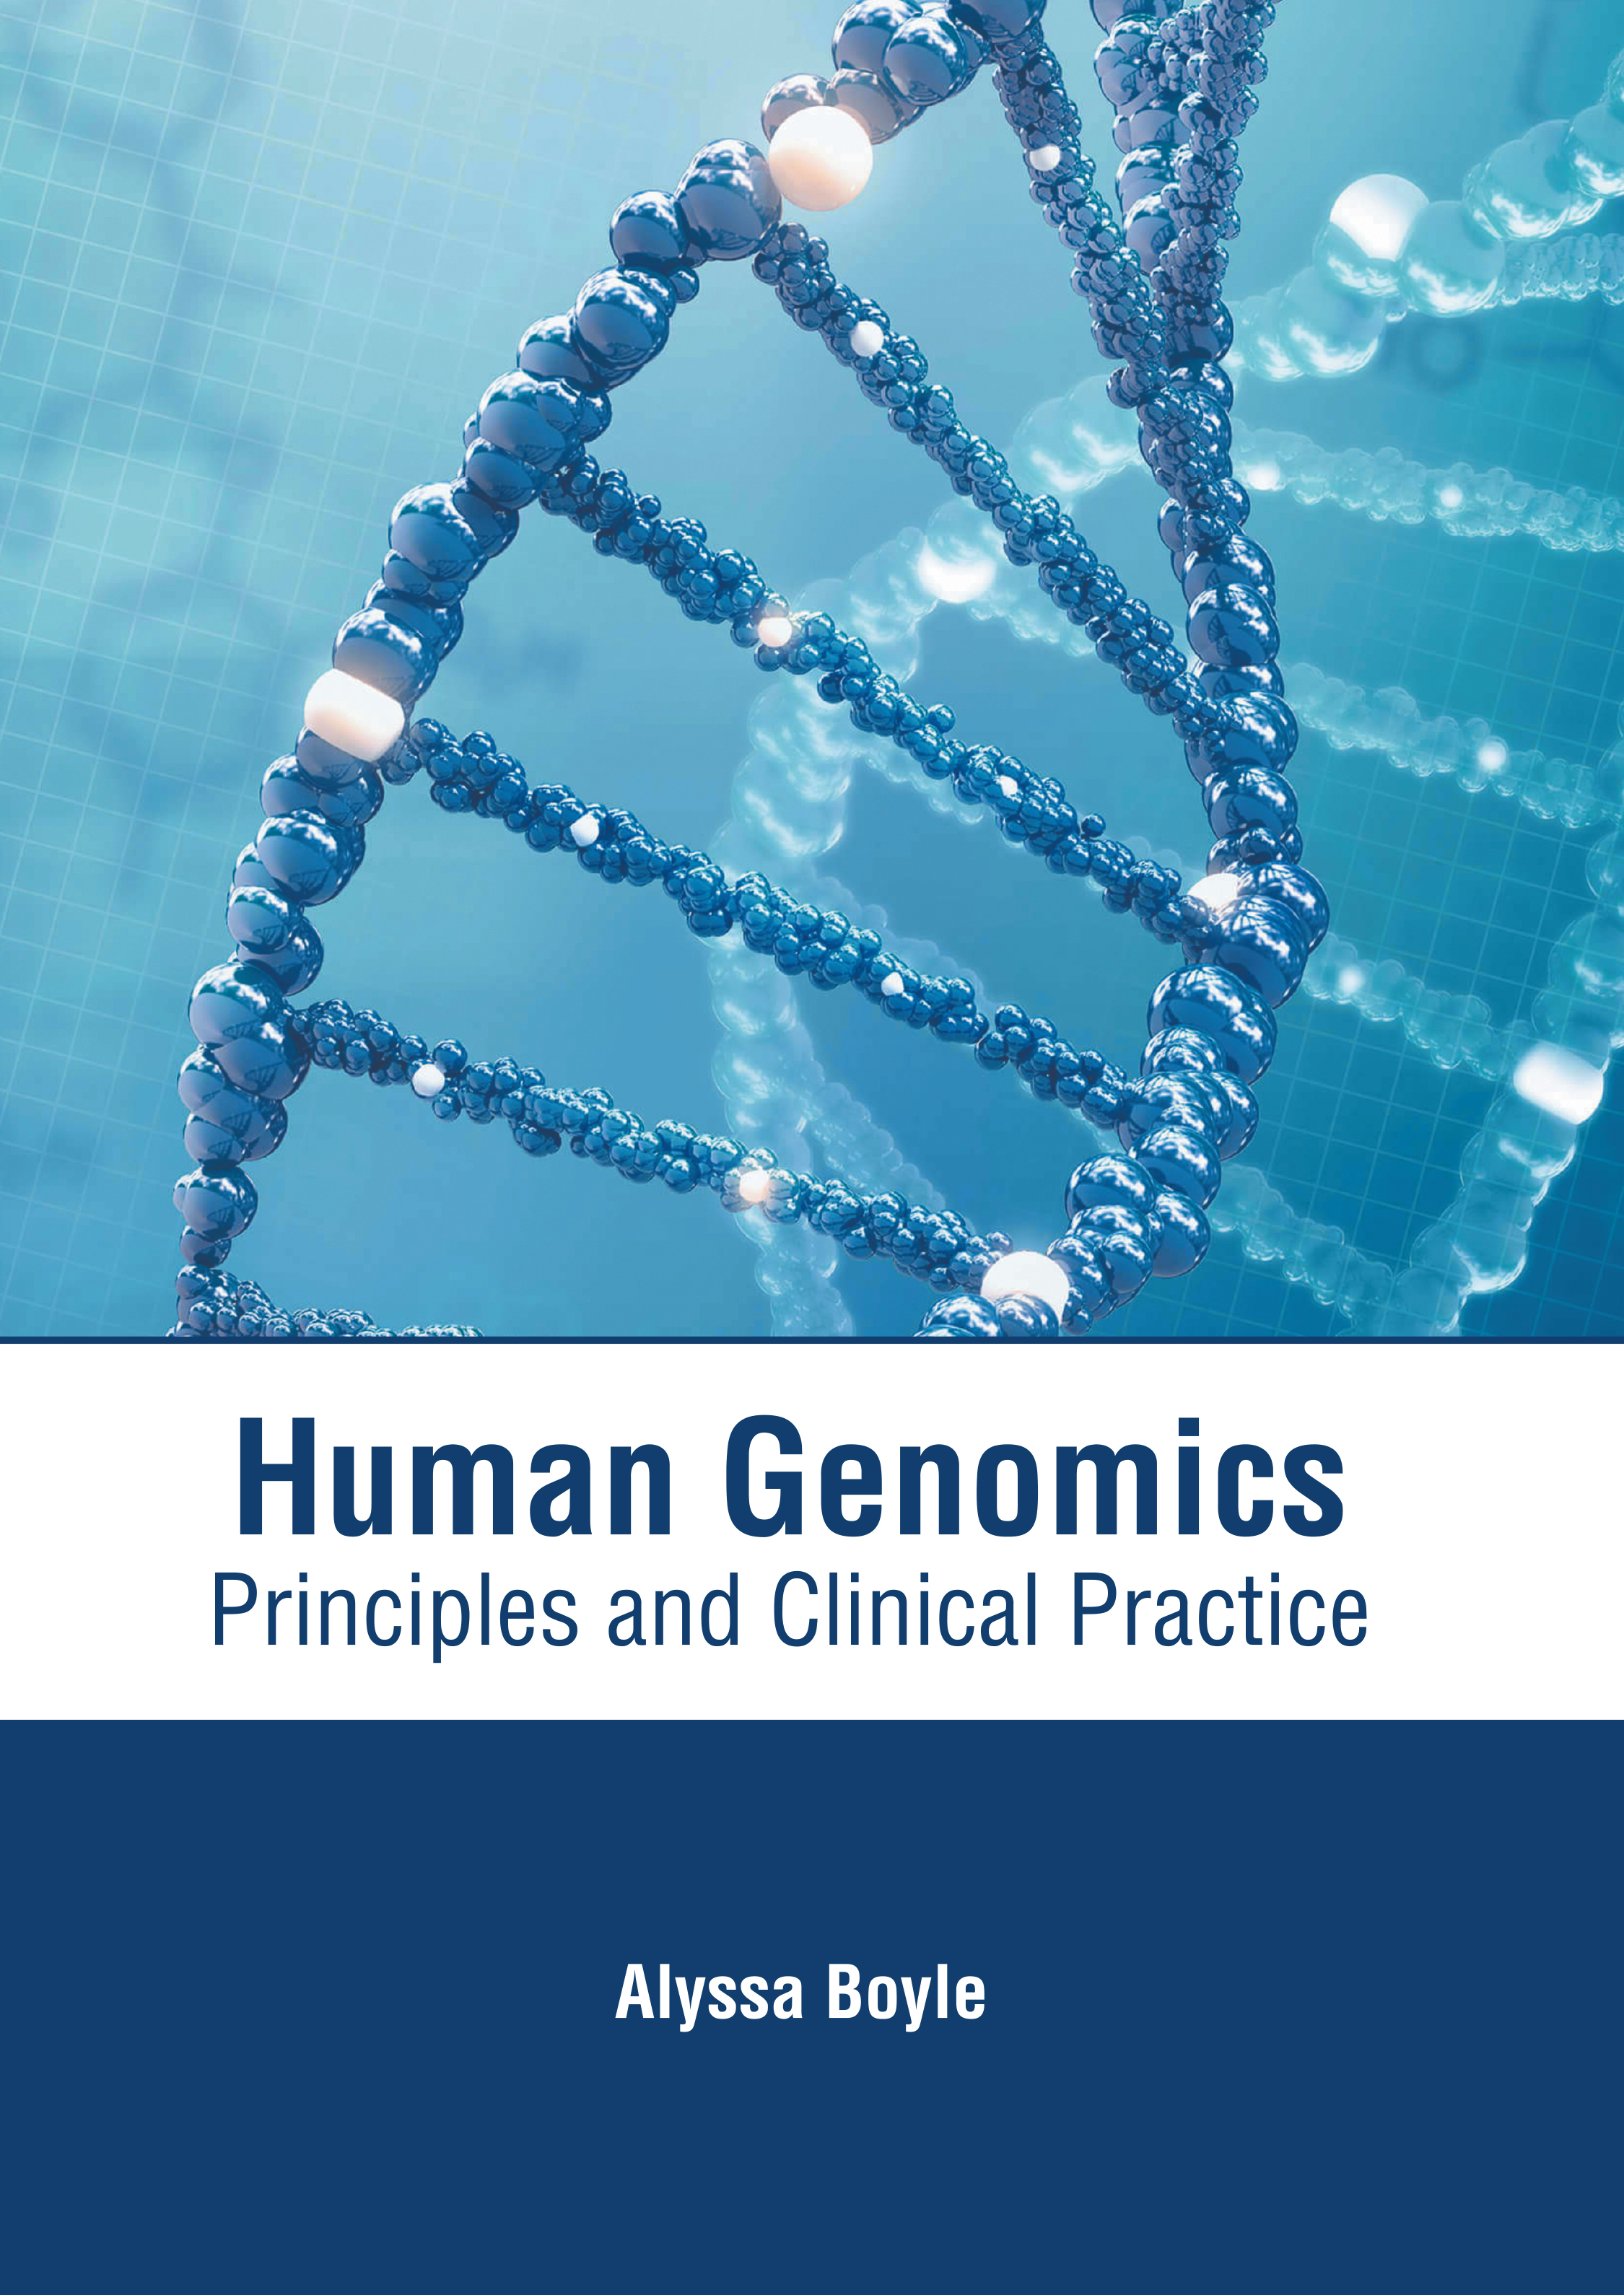 
exclusive-publishers/american-medical-publishers/human-genomics-principles-and-clinical-practice-9781639272532